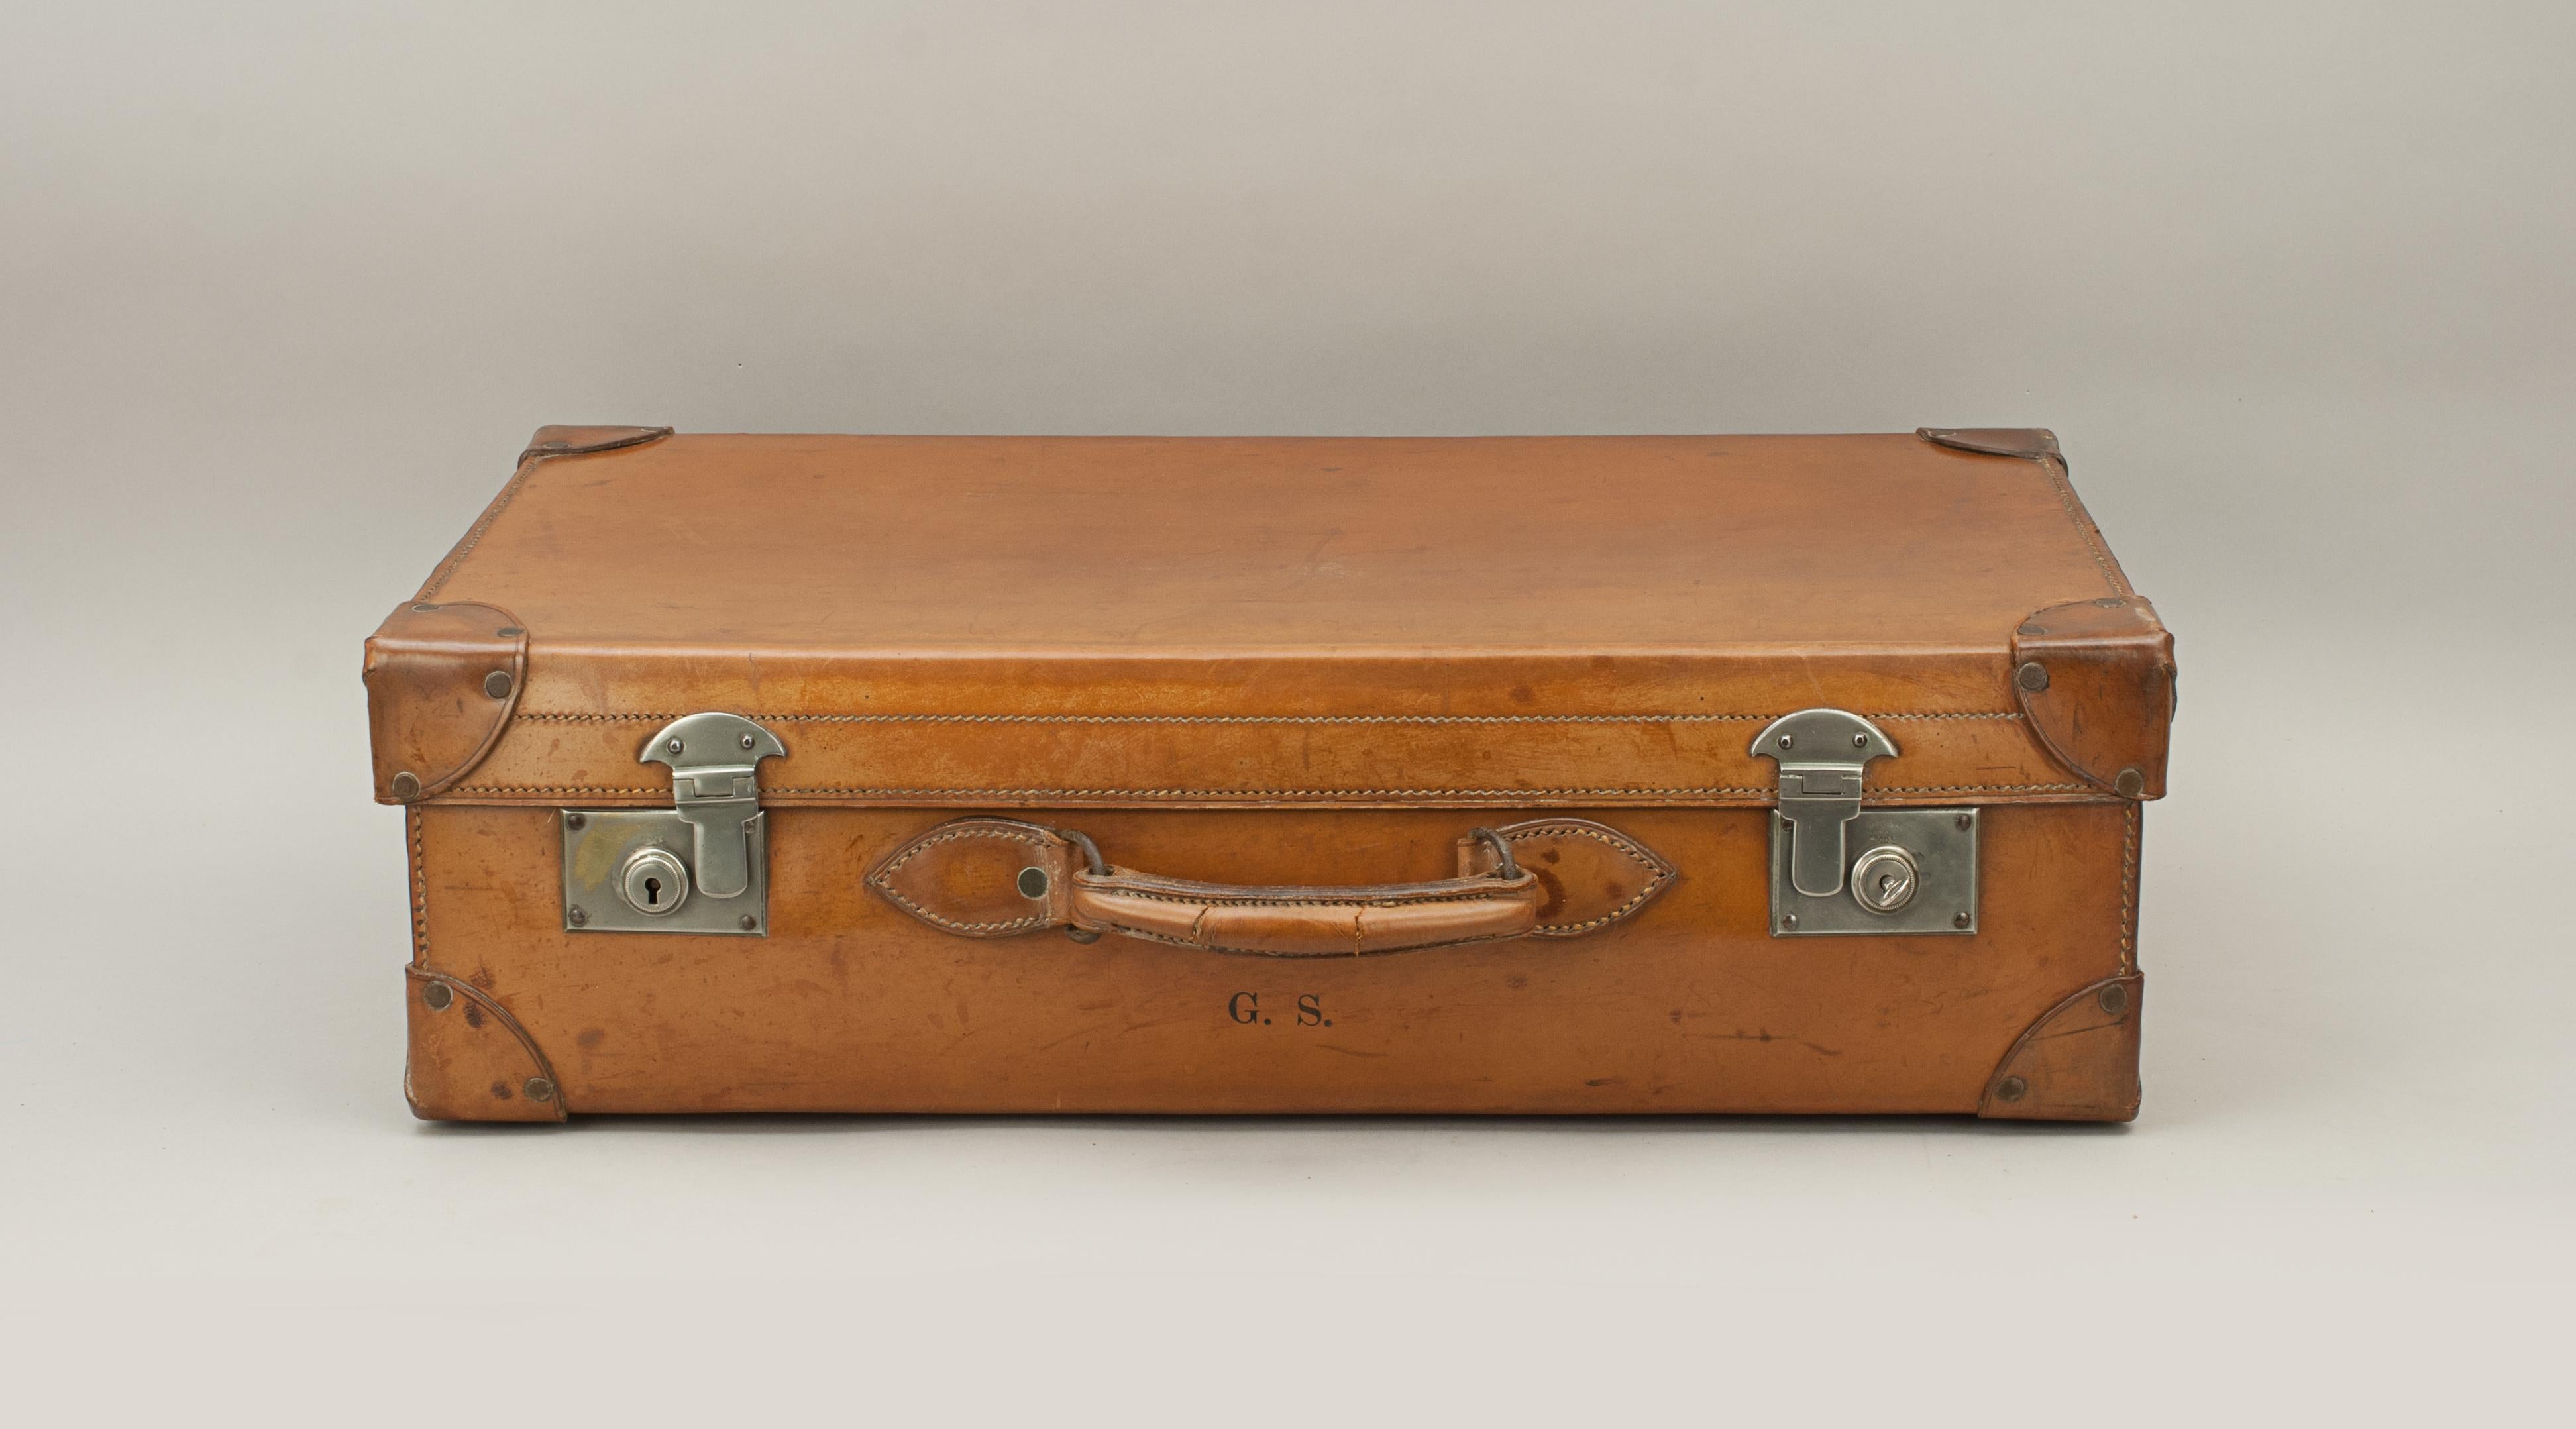 Vintage leather suitcase.
A stunning high quality tan leather suitcase. The case is with reinforced corners, chrome stud feet, single carry handle, two chrome locks and original cream linen interior. The outer leather embossed with the initials